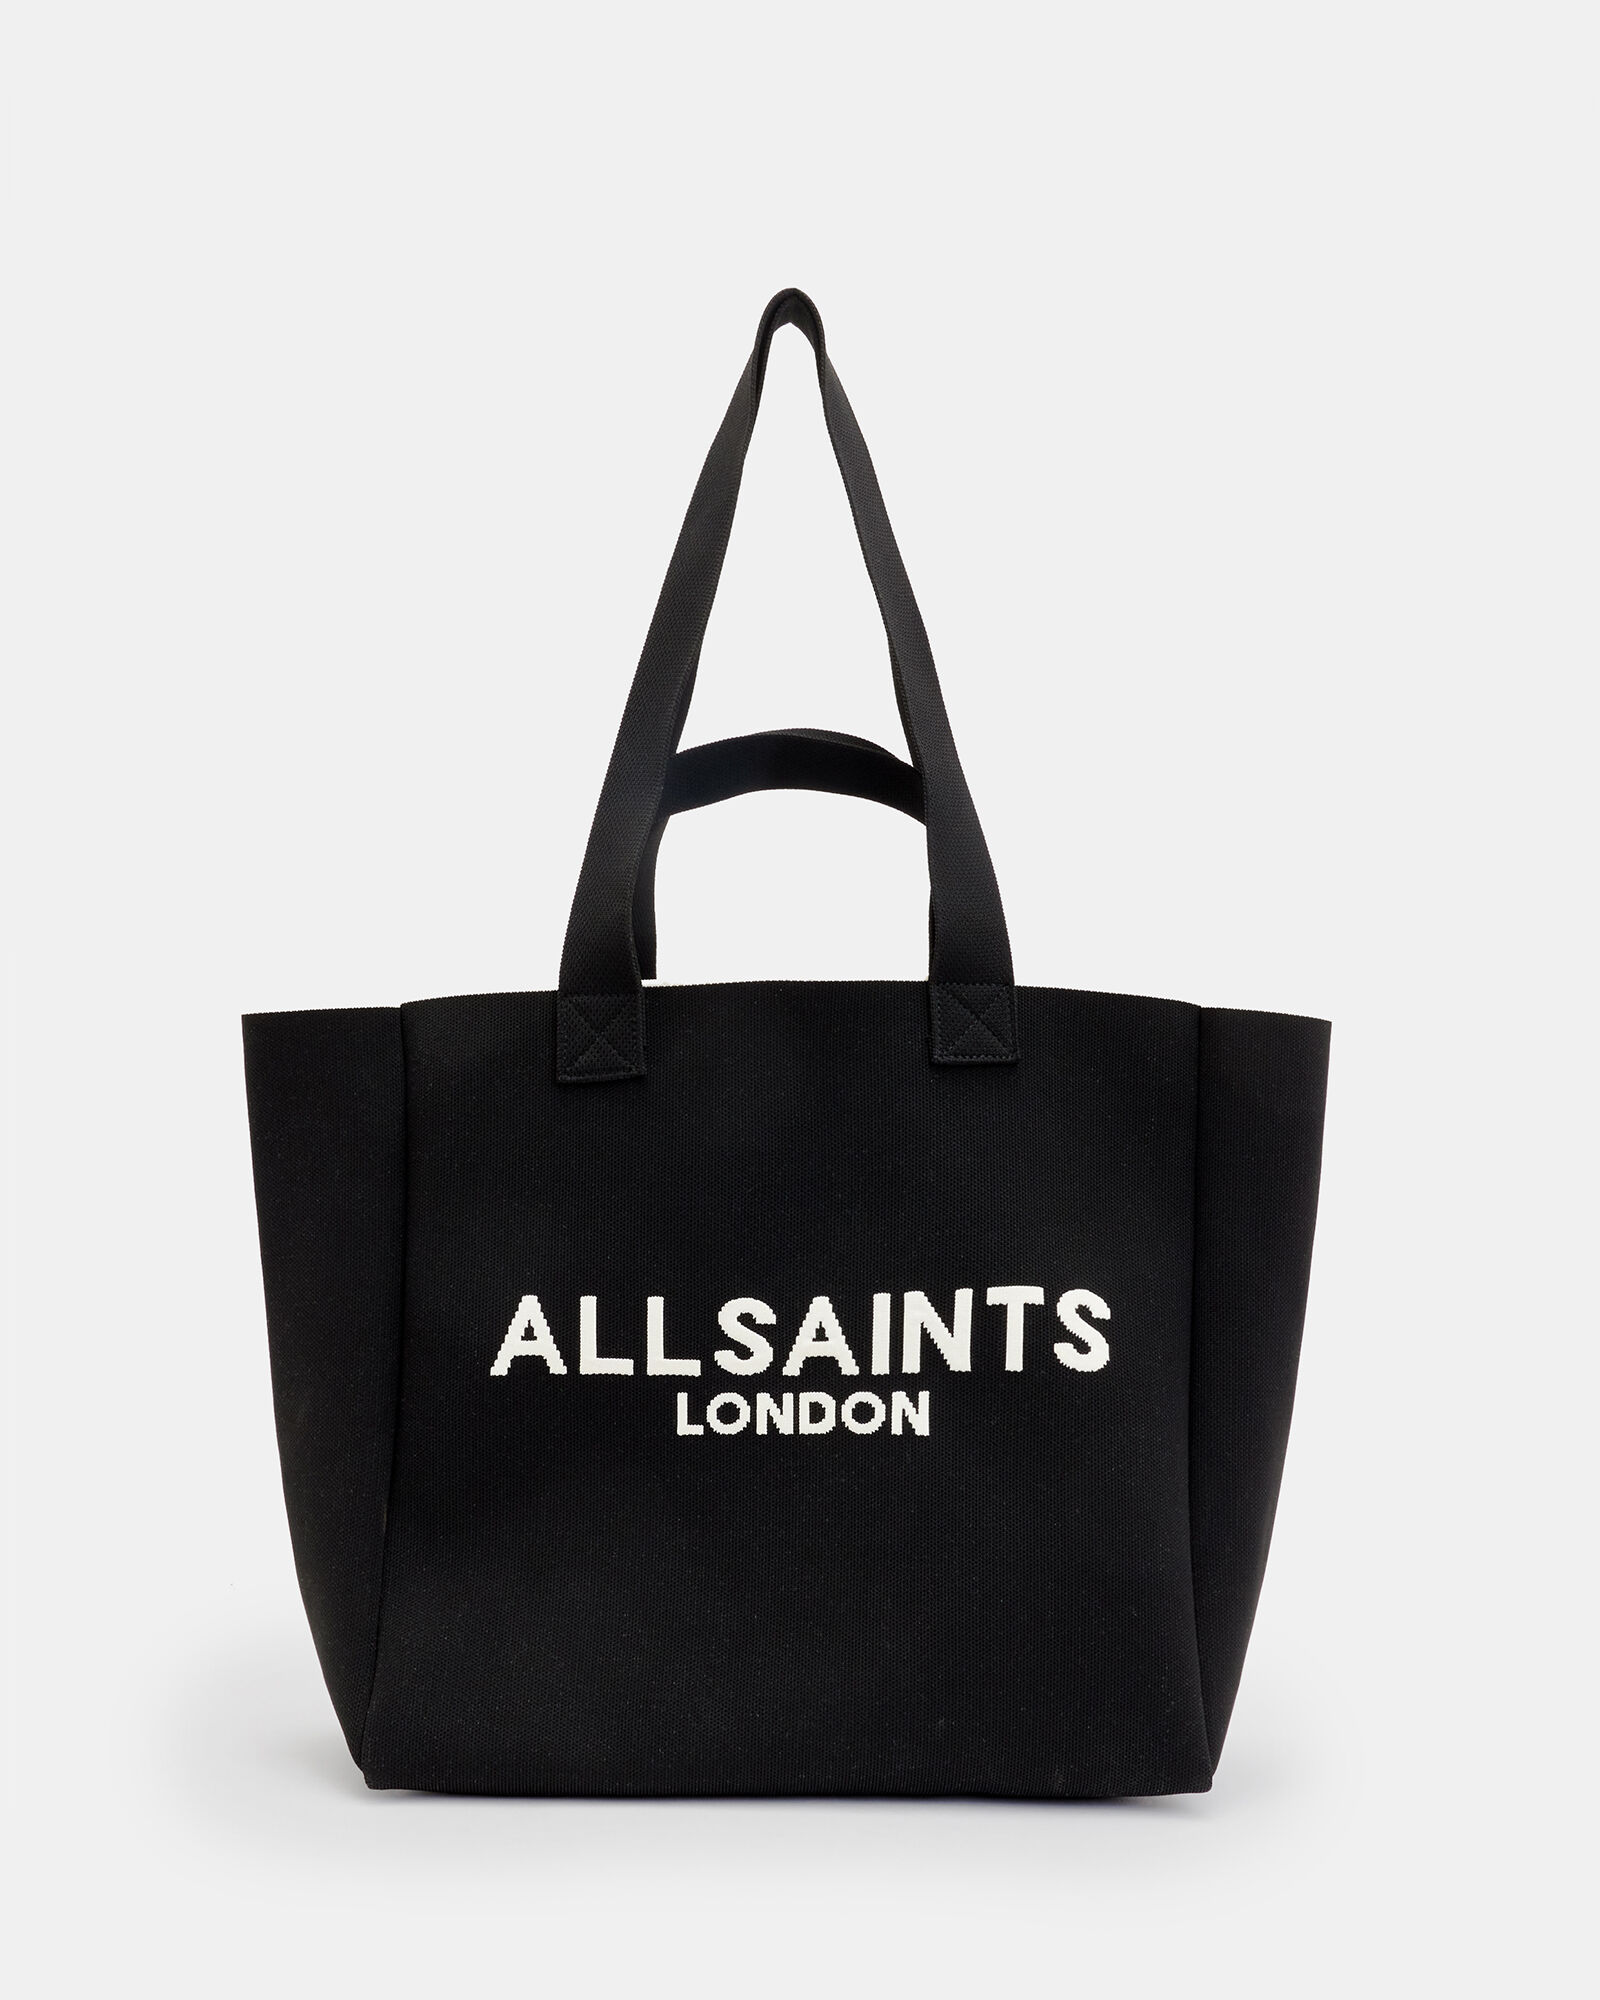 All Saints Kita Pebbled Leather Crossbody Bucket Bag with Coin Purse |  Leather crossbody, Genuine leather bags, Leather